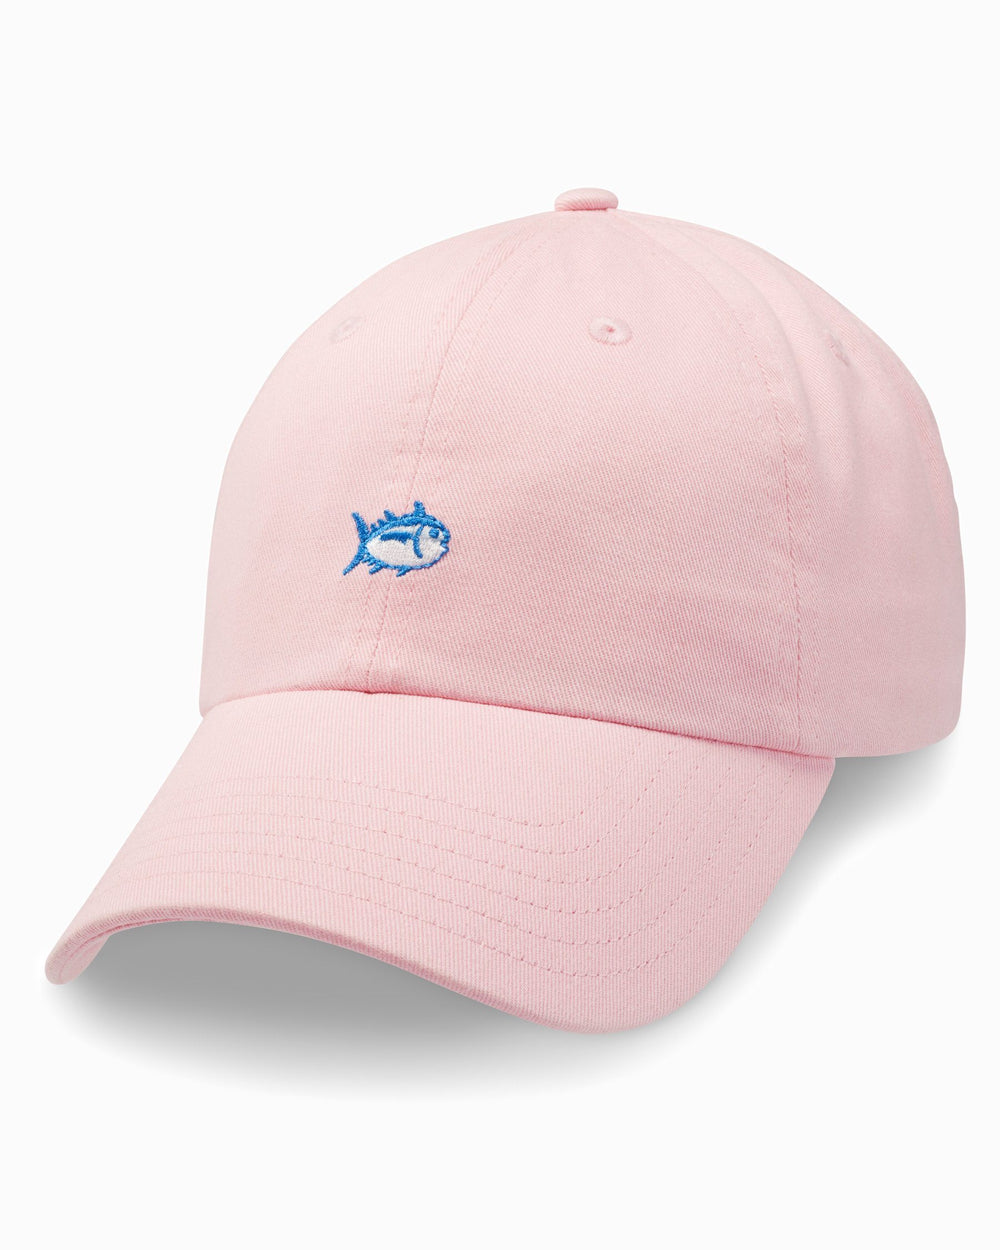 The front of the Skipjack Hat by Southern Tide - Pink